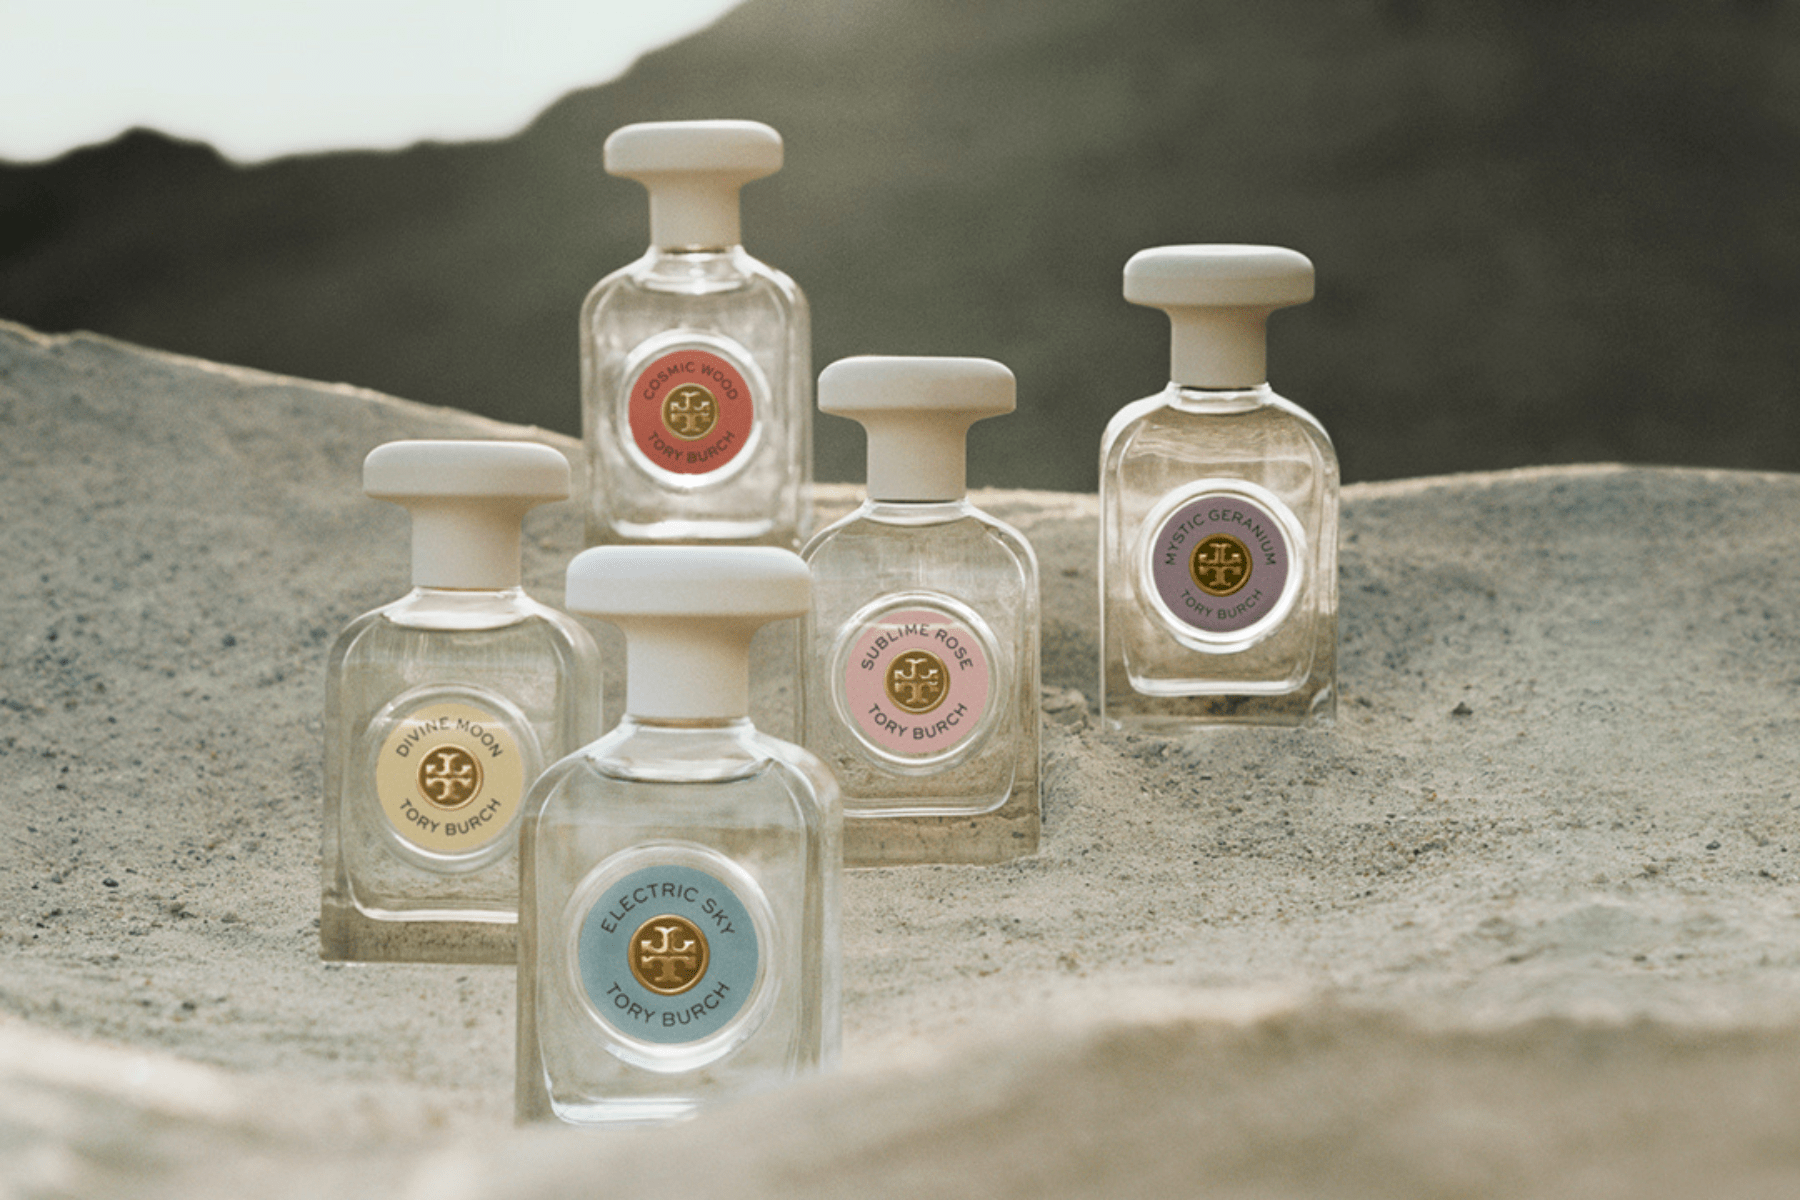 The Tory Burch Essence of Dreams fragrance line has landed in Malaysia